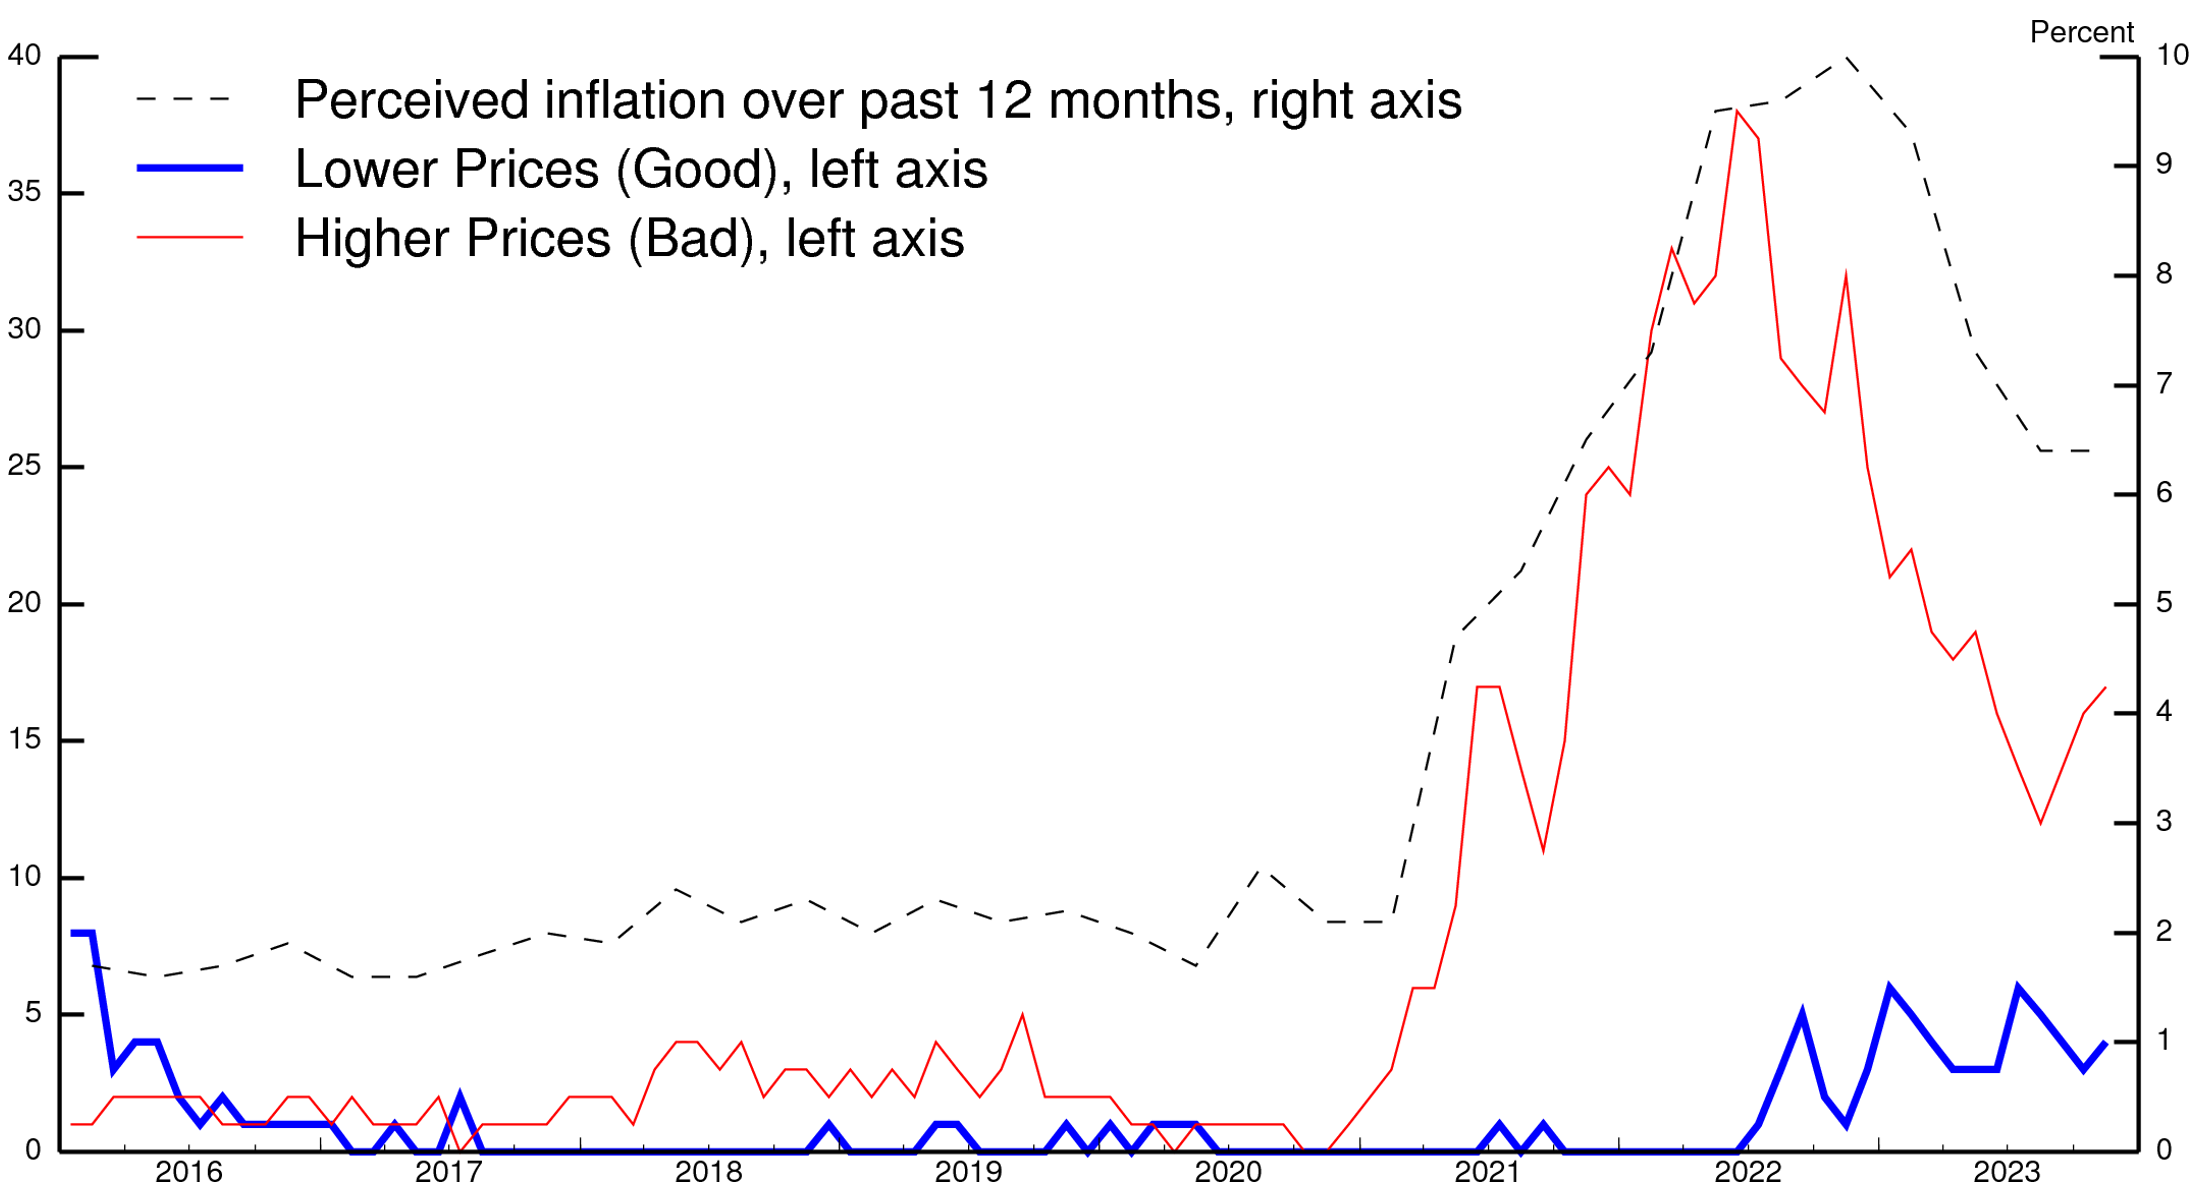 Figure 2. News Heard about Prices. See accessible link for data.